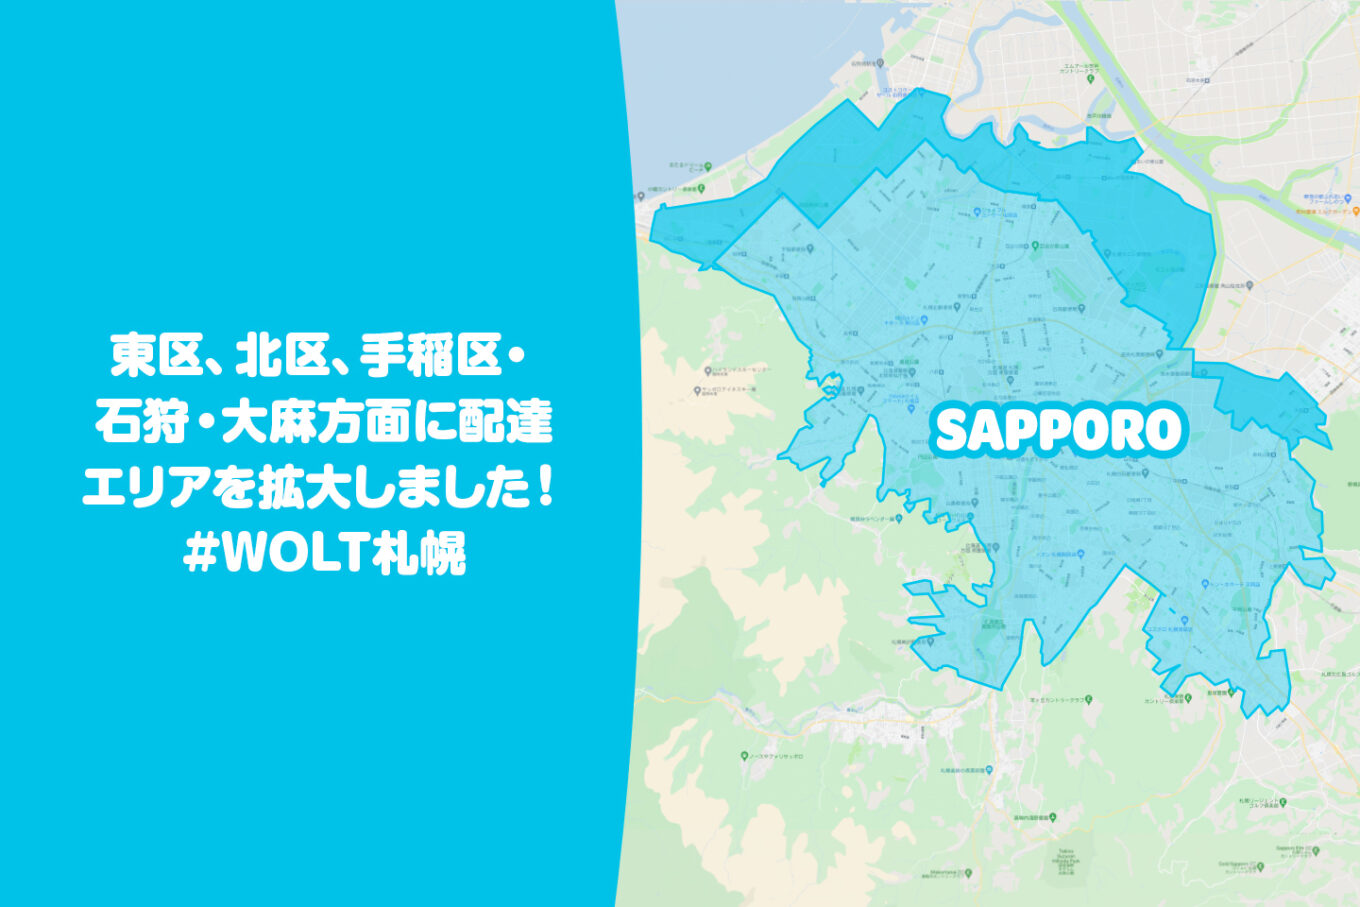 Wolt（ウォルト）札幌エリア・2021年10月28日拡大